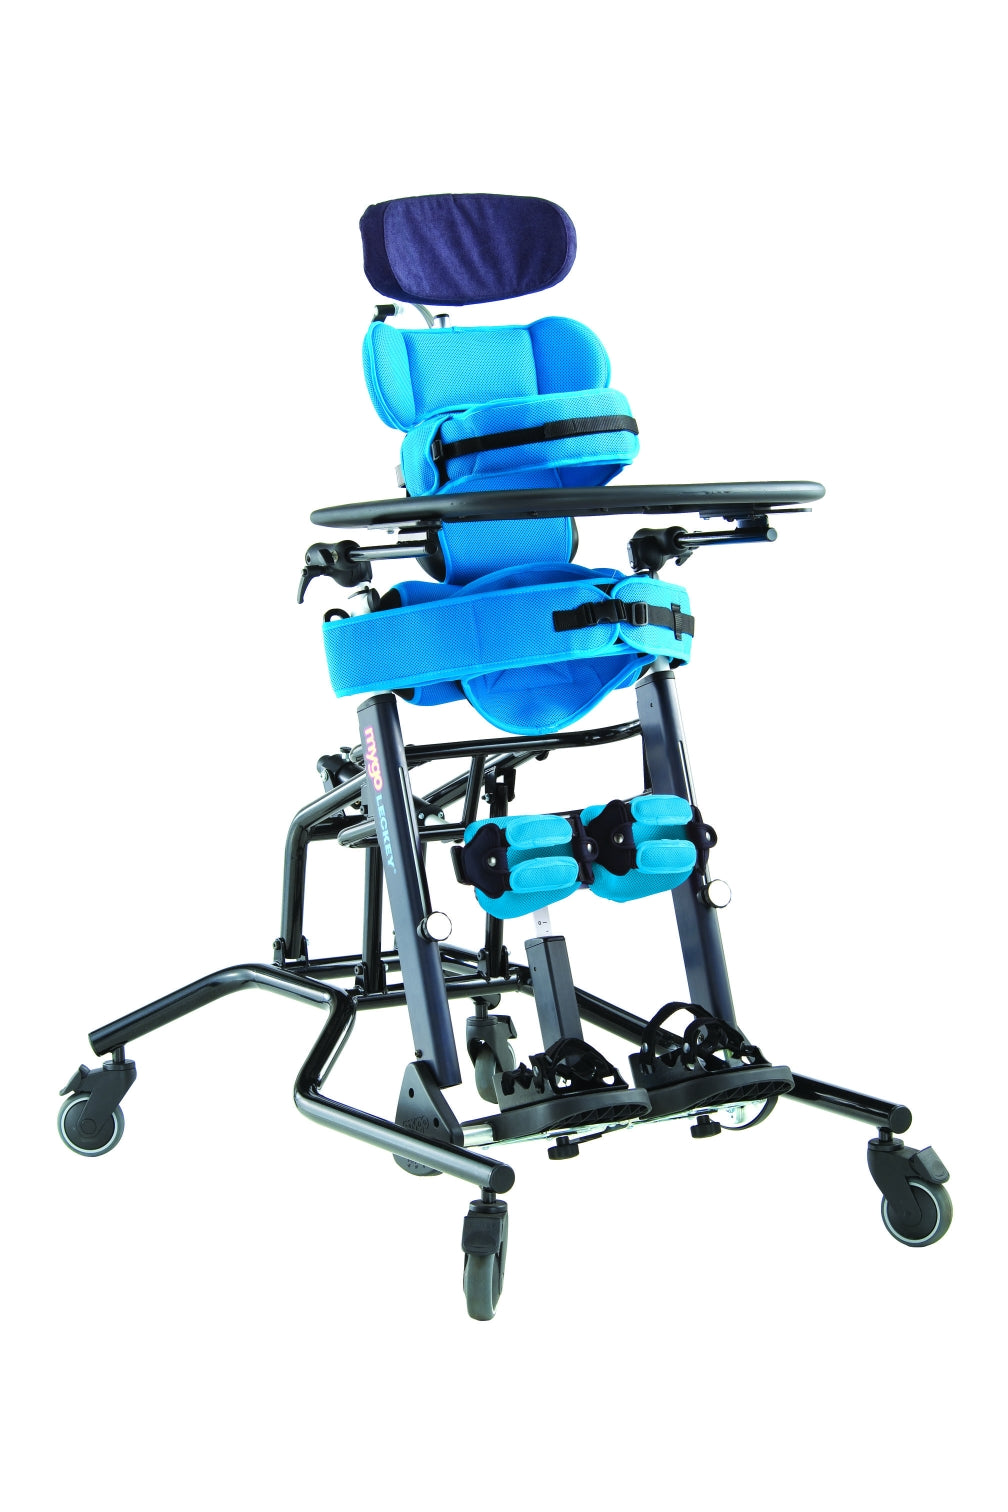 How to choose a paediatric stander for your child